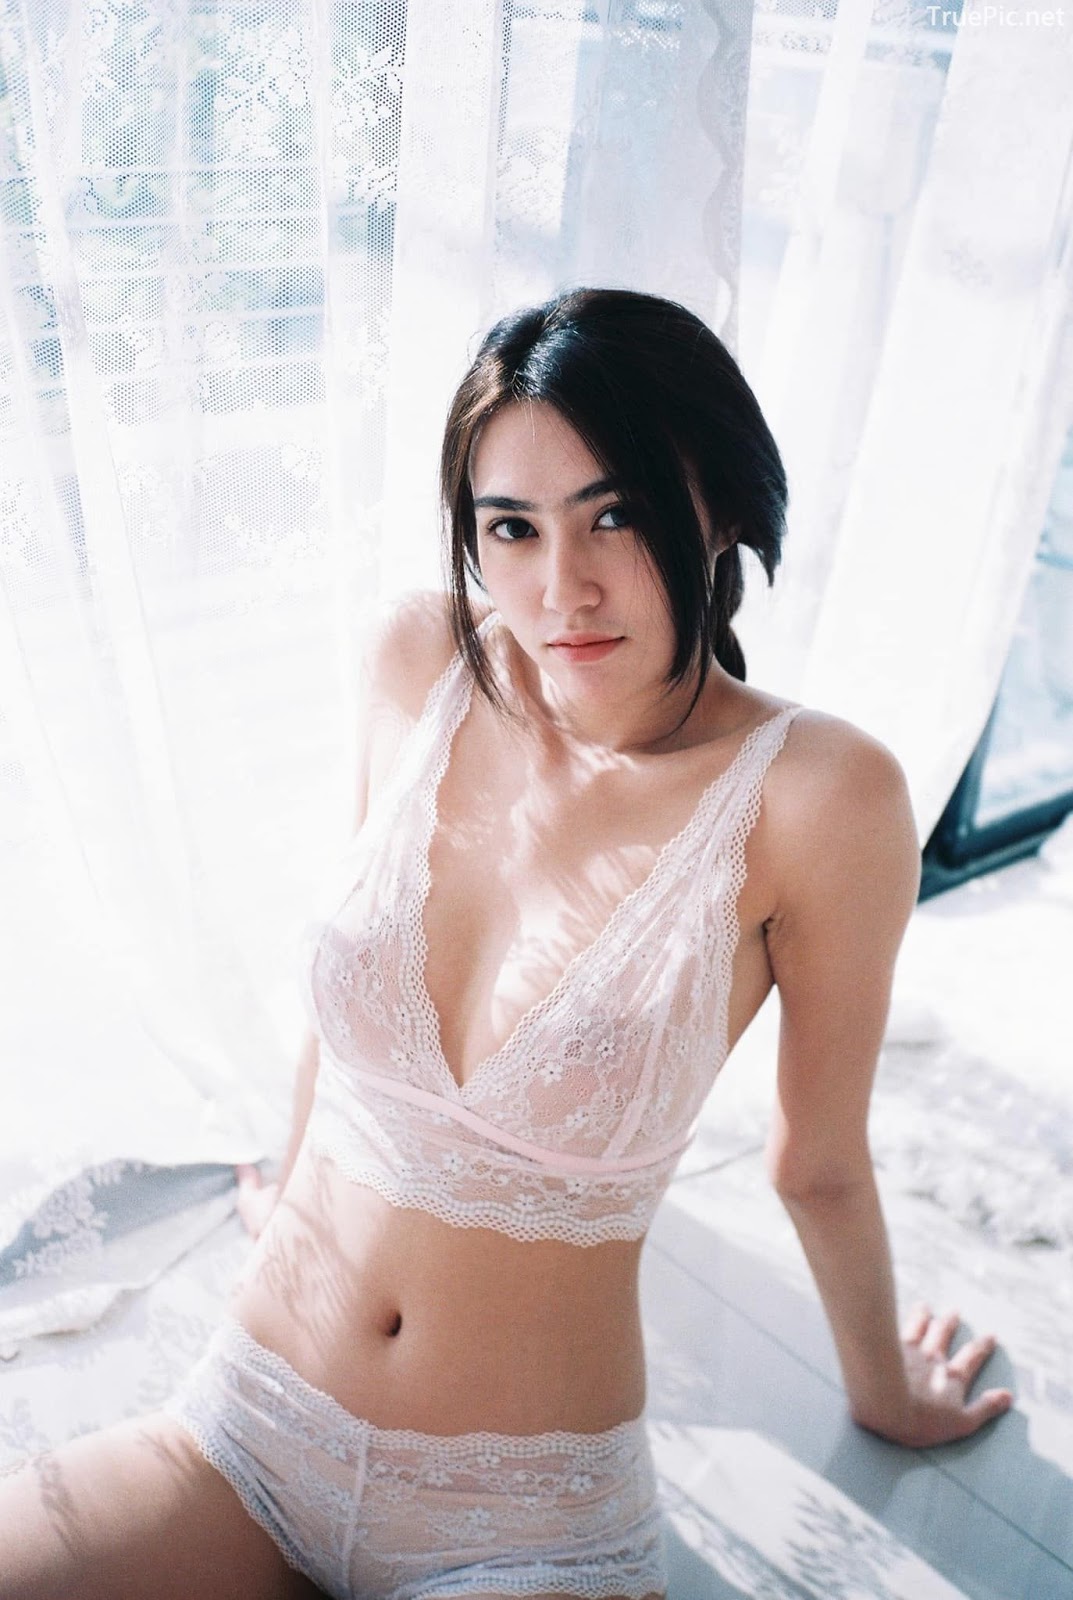 Thailand Hot model - Baifern Rinrucha Kamnark - Sexy in Transparent Lace Lingerie - TruePic.net - Picture 16